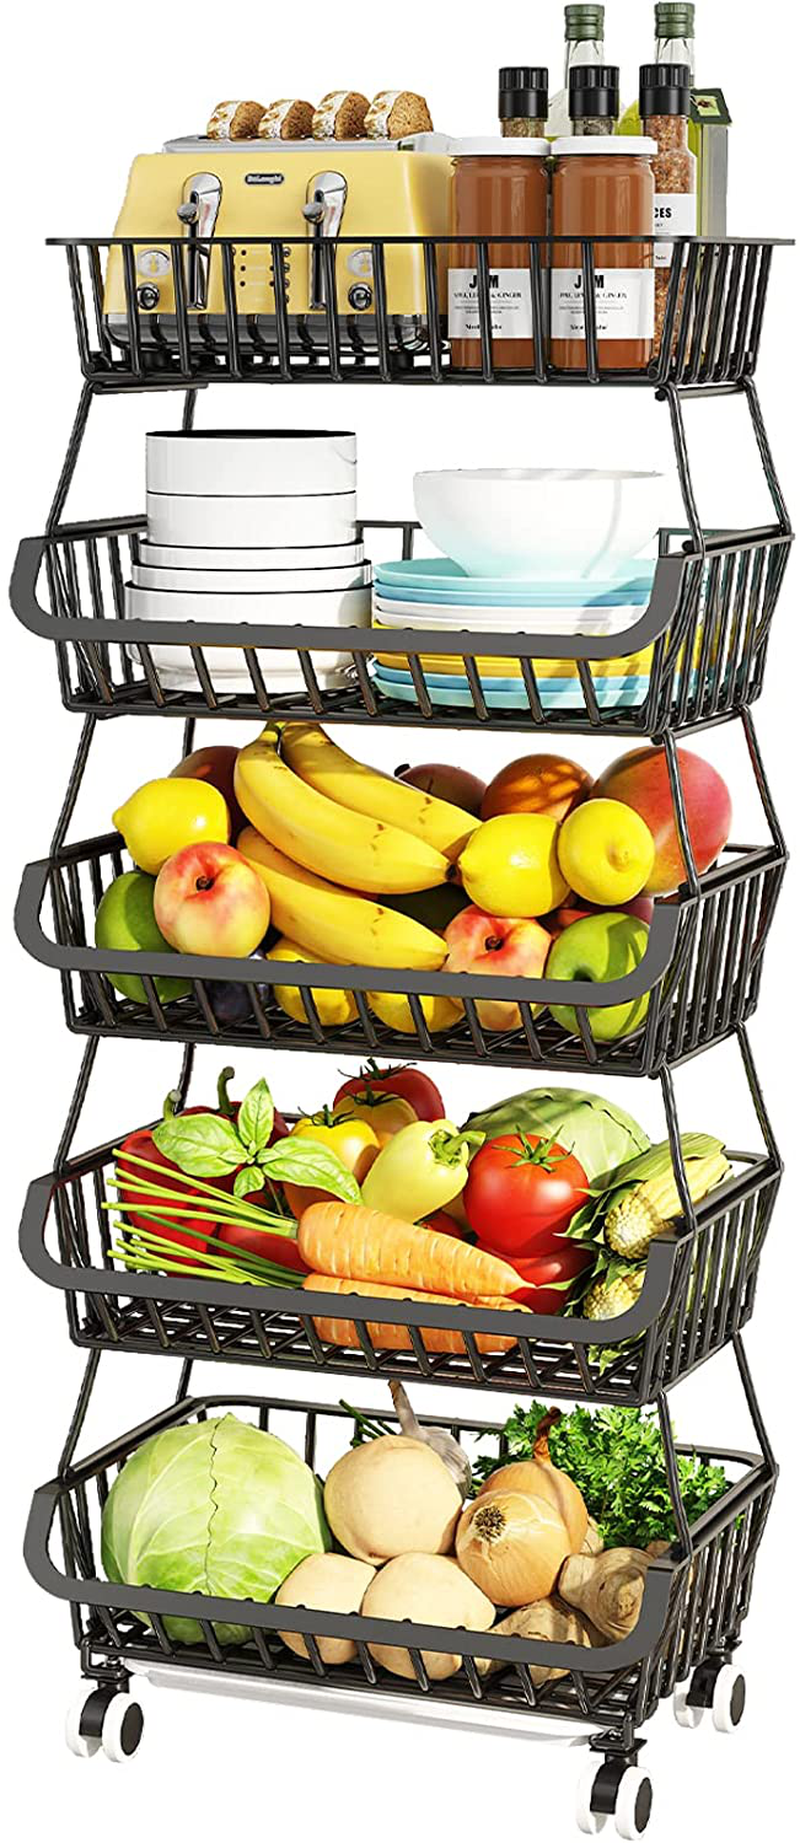 Fruit Basket for Kitchen Storage - 5 Tier Vegetable Organizer Stackable Metal Wire Baskets with Rolling Wheels Utility Bins Rack Cart for Produce Pantry Laundry Garage, Black